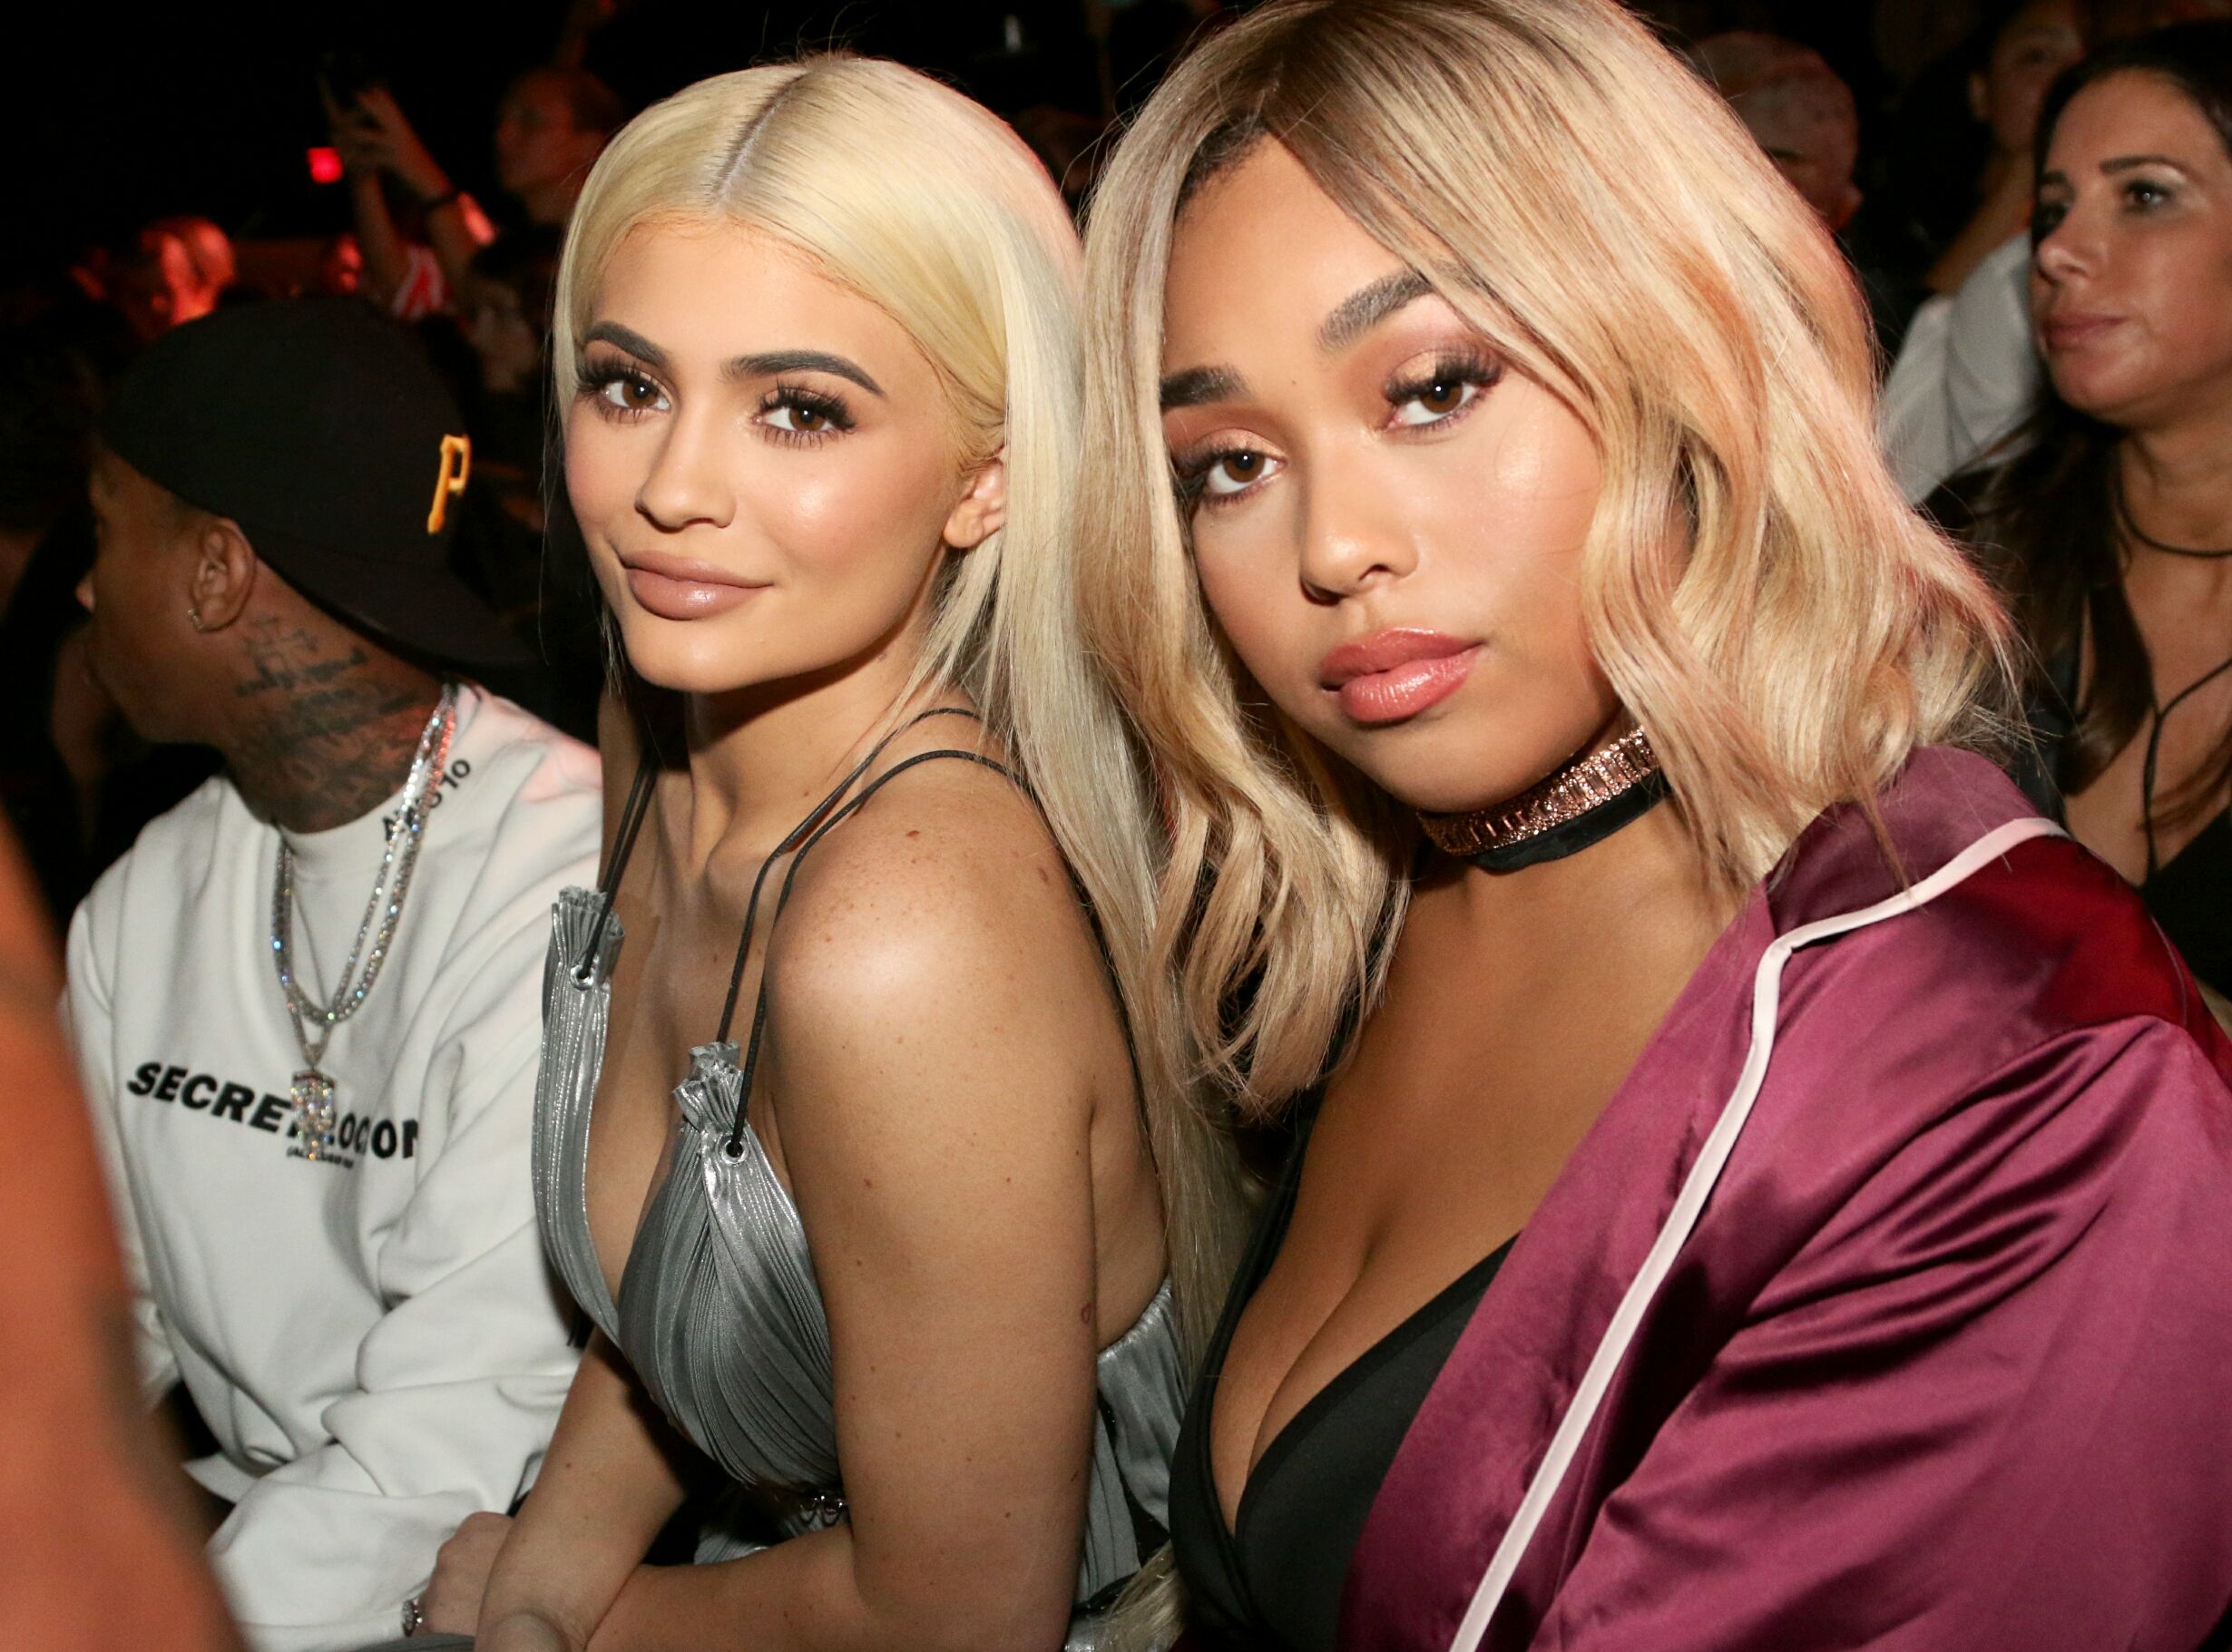 Jordyn Woods: What does Kylie Jenner's former BFF do for a living?